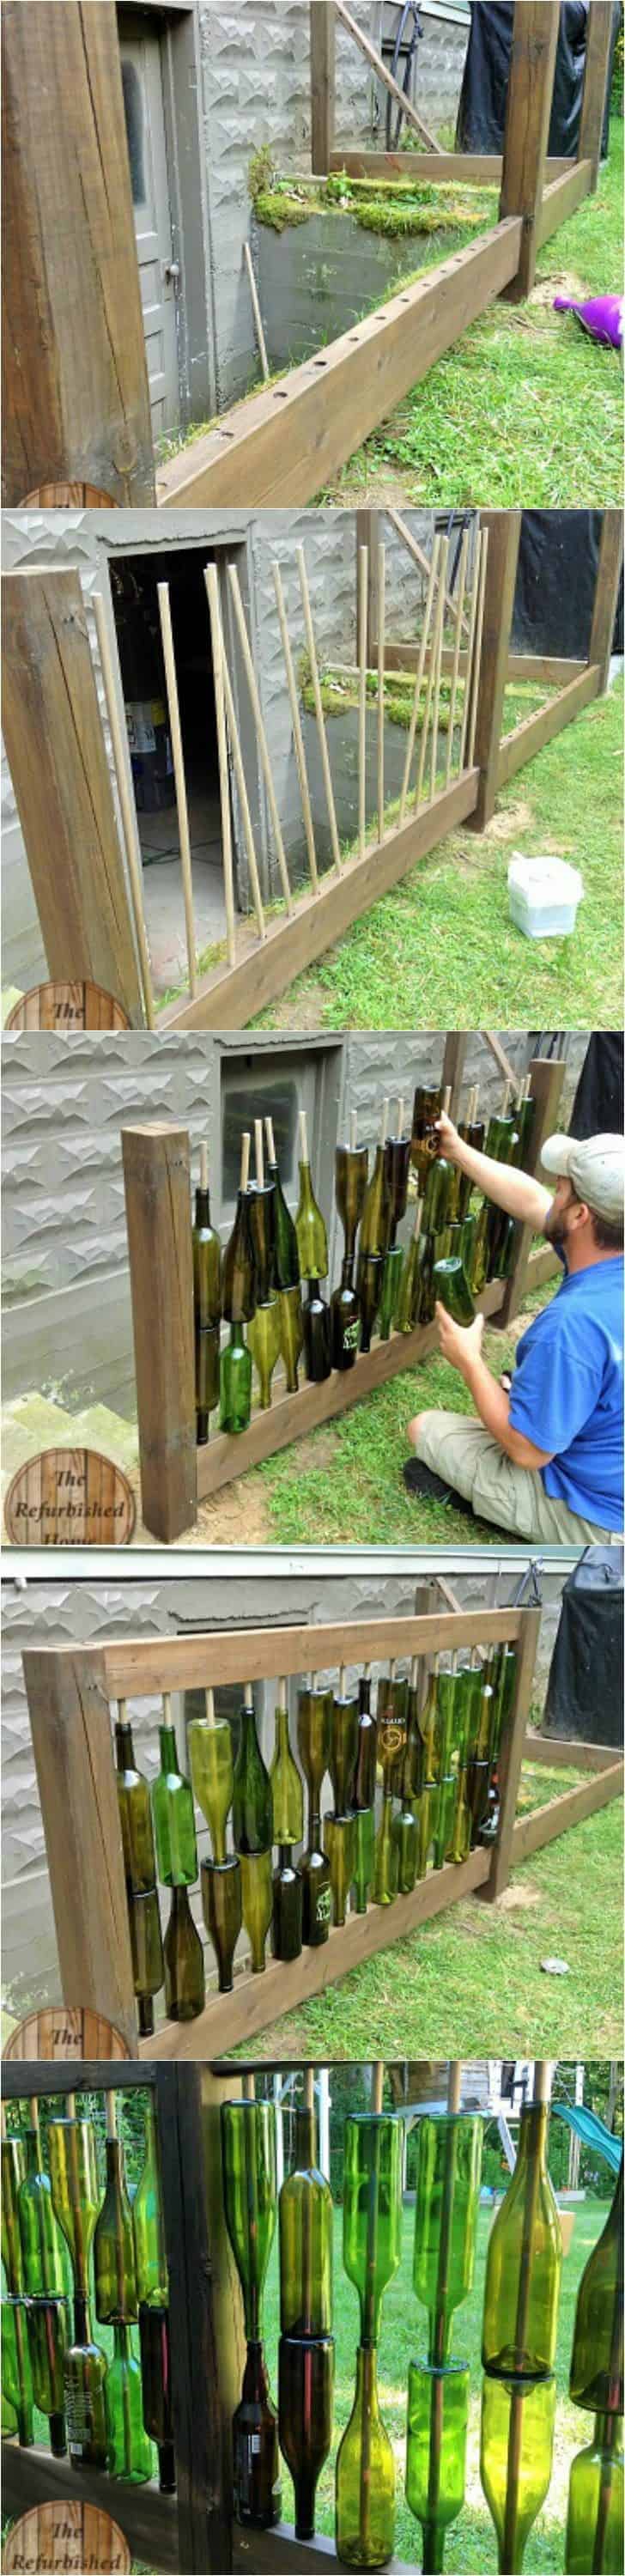 Make Your Repurposed Wine Bottle Fence